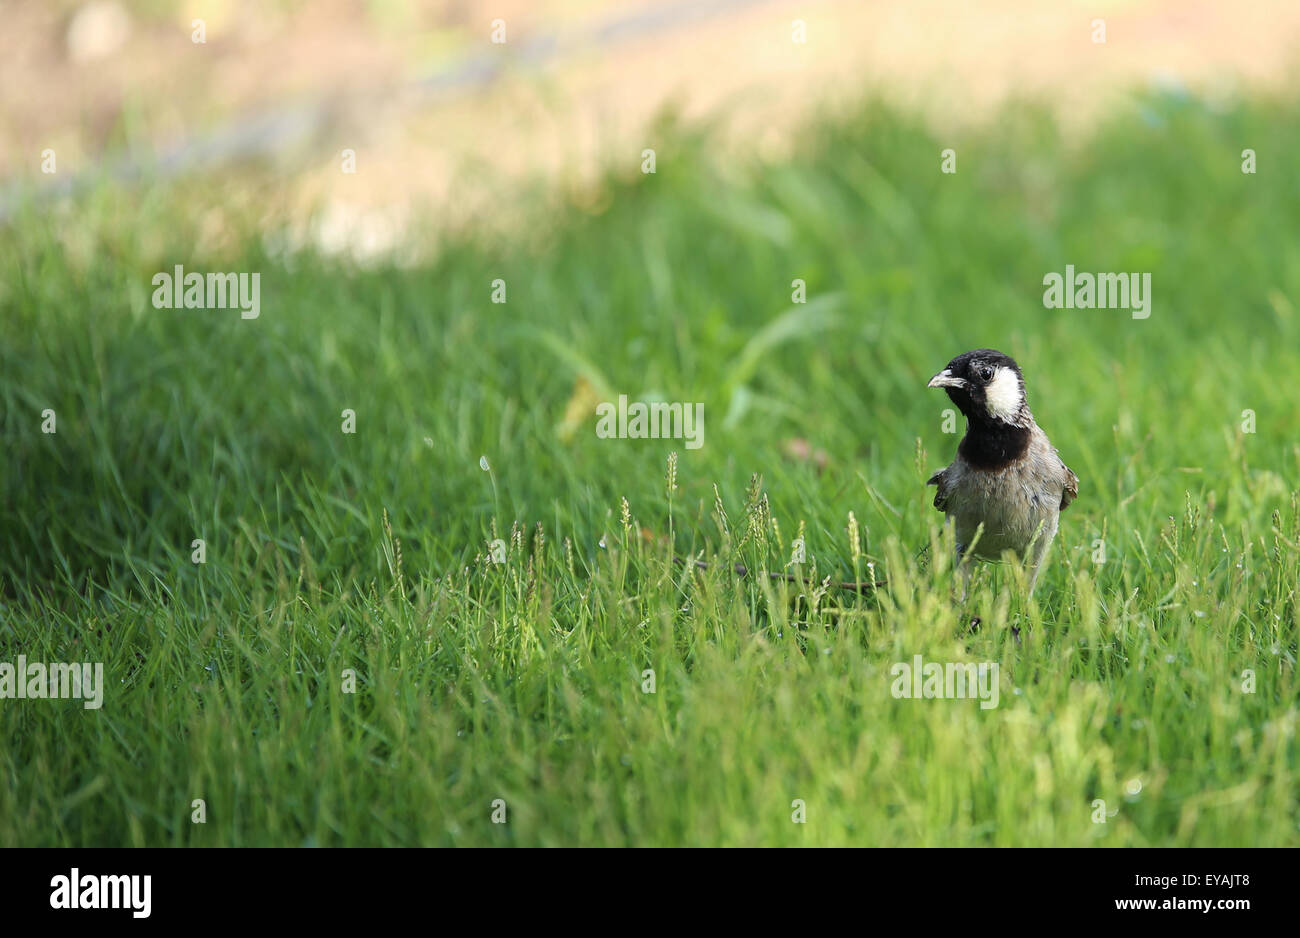 A lone sparrow in green lawn, shot at heritage park, Abu Dhabi, UAE Stock Photo